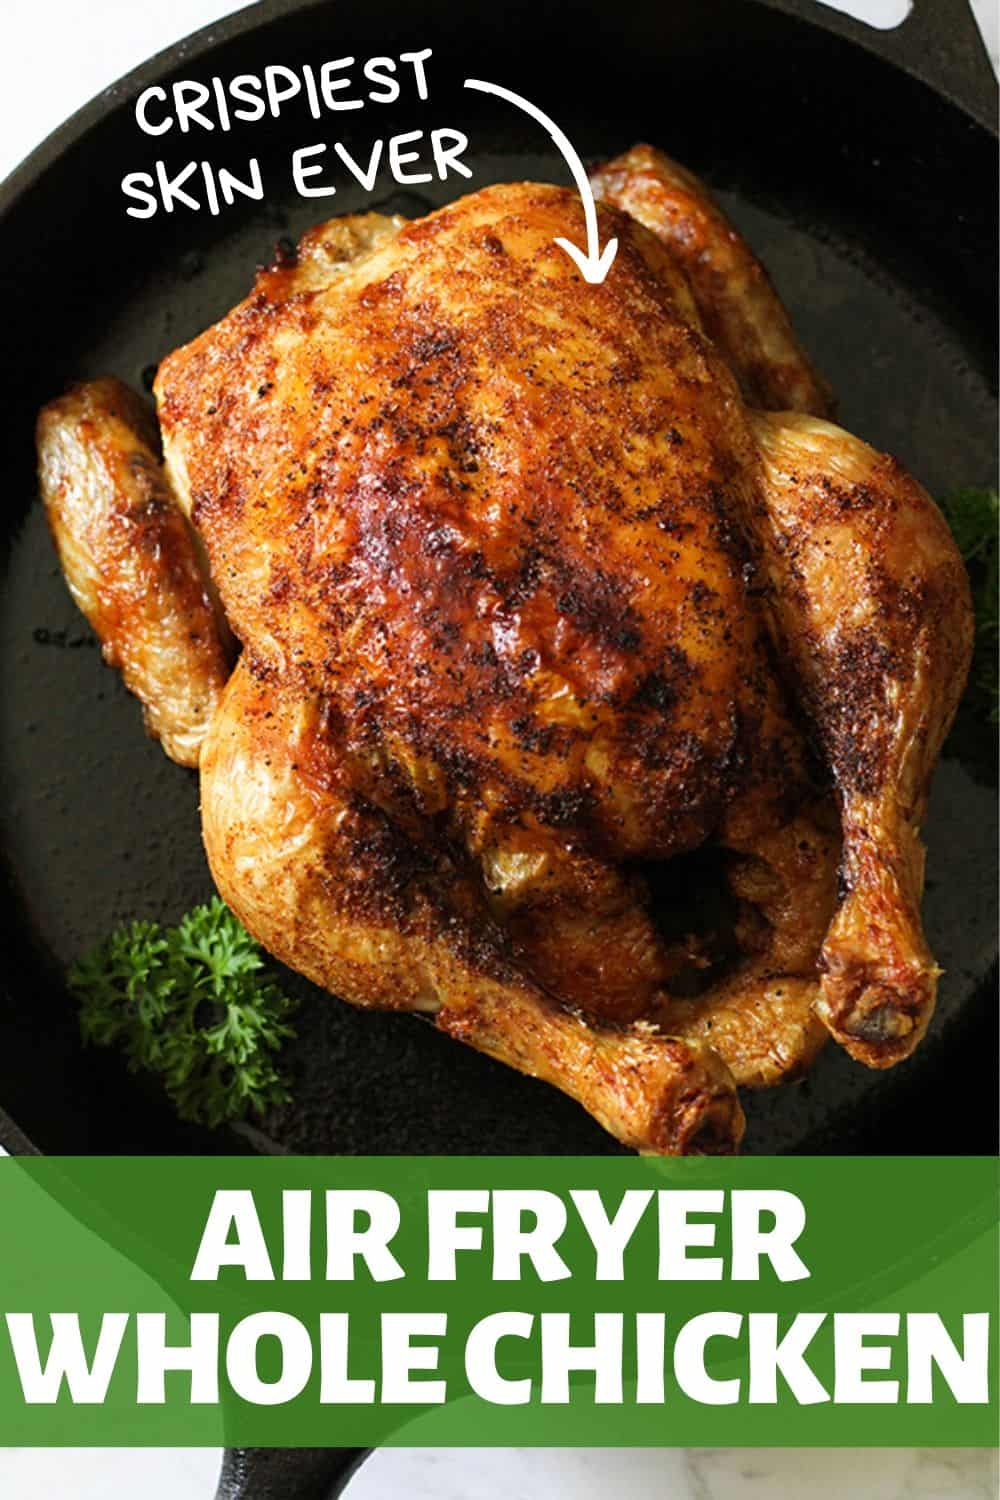 19 air fryer recipes chicken whole ideas